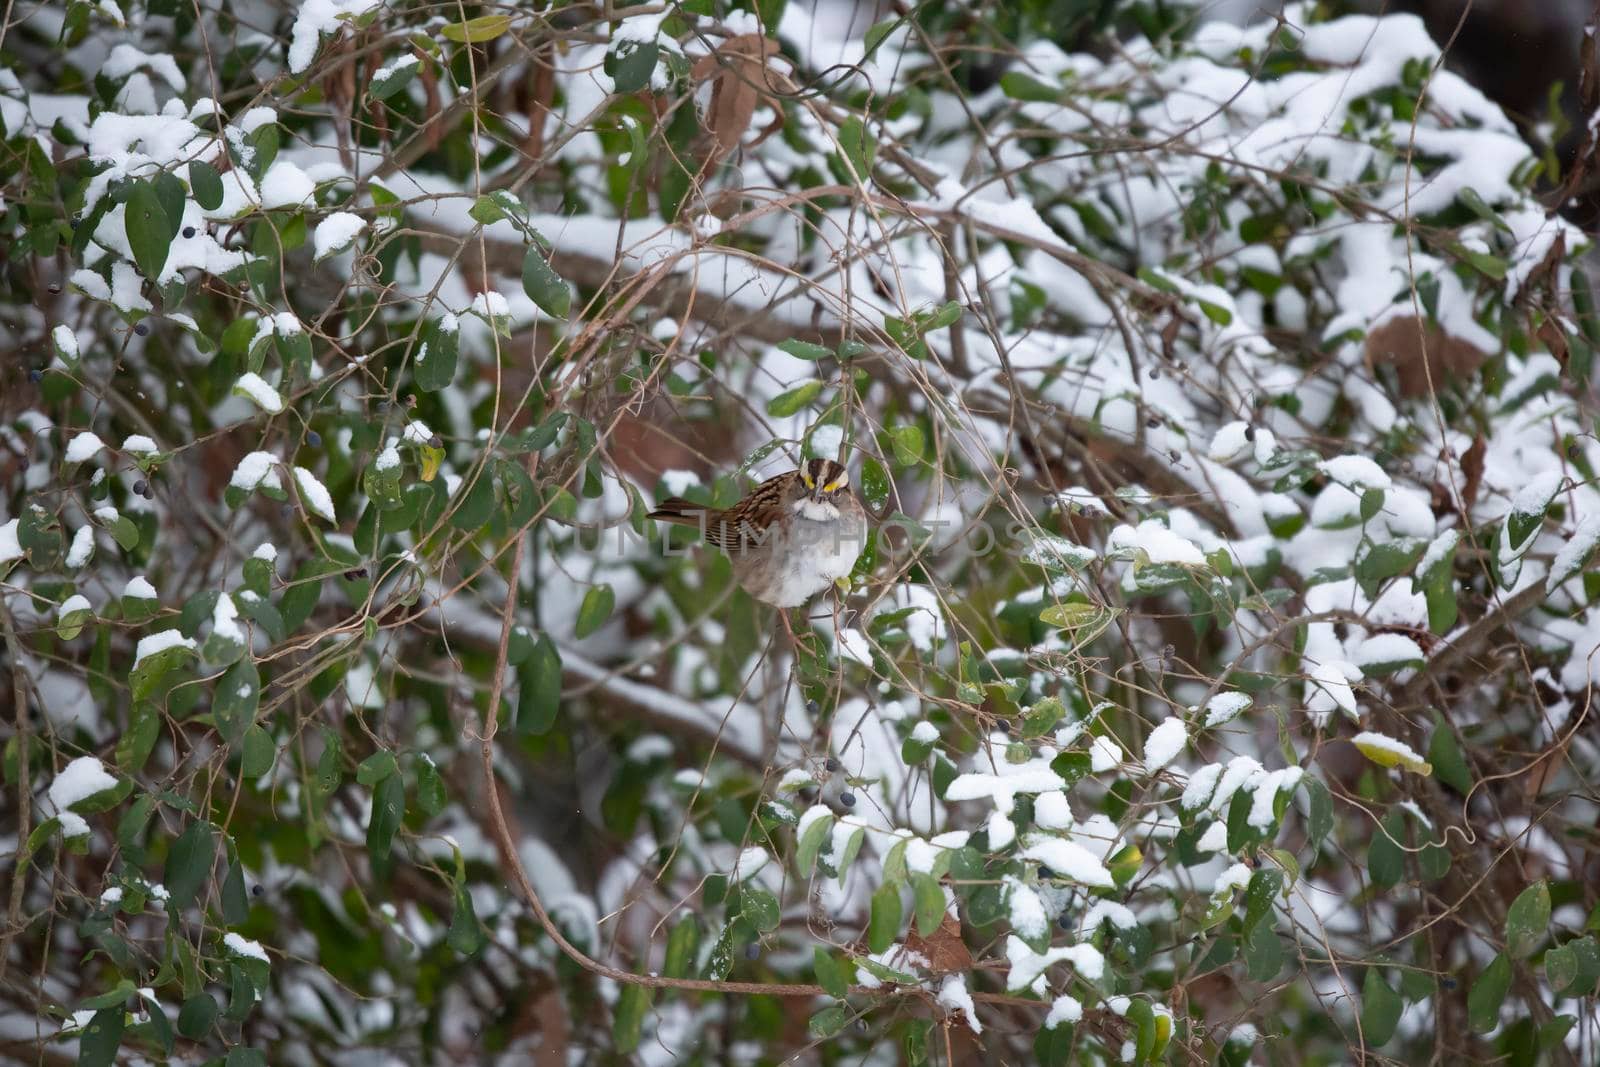 White-throated sparrow (Zonotrichia albicollis) eating a purple berry on a snow-covered bush